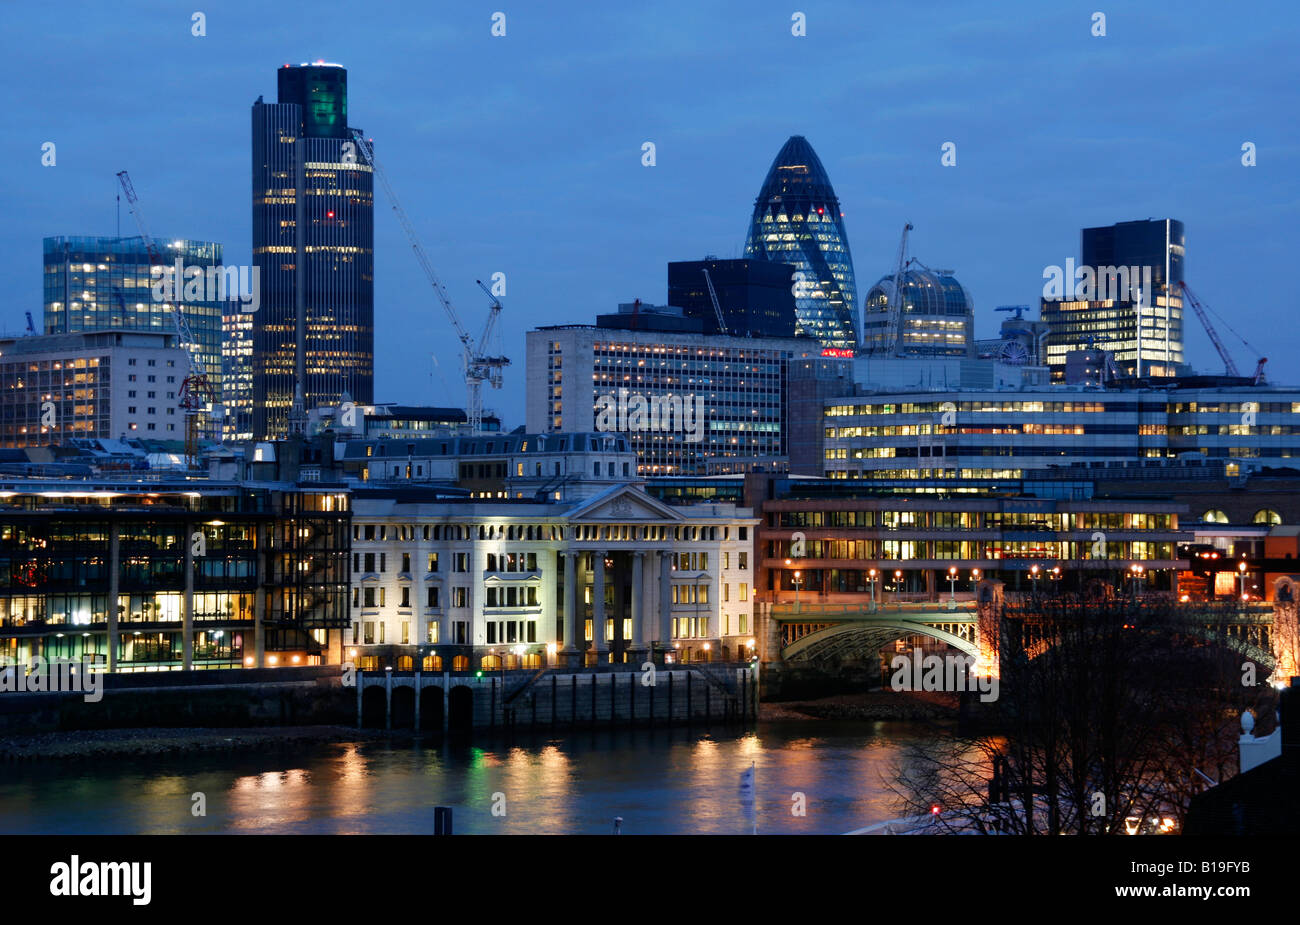 England, London, City of London. A view of London from the Tate Modern with the building nicknamed 'The Gherkin' in background Stock Photo